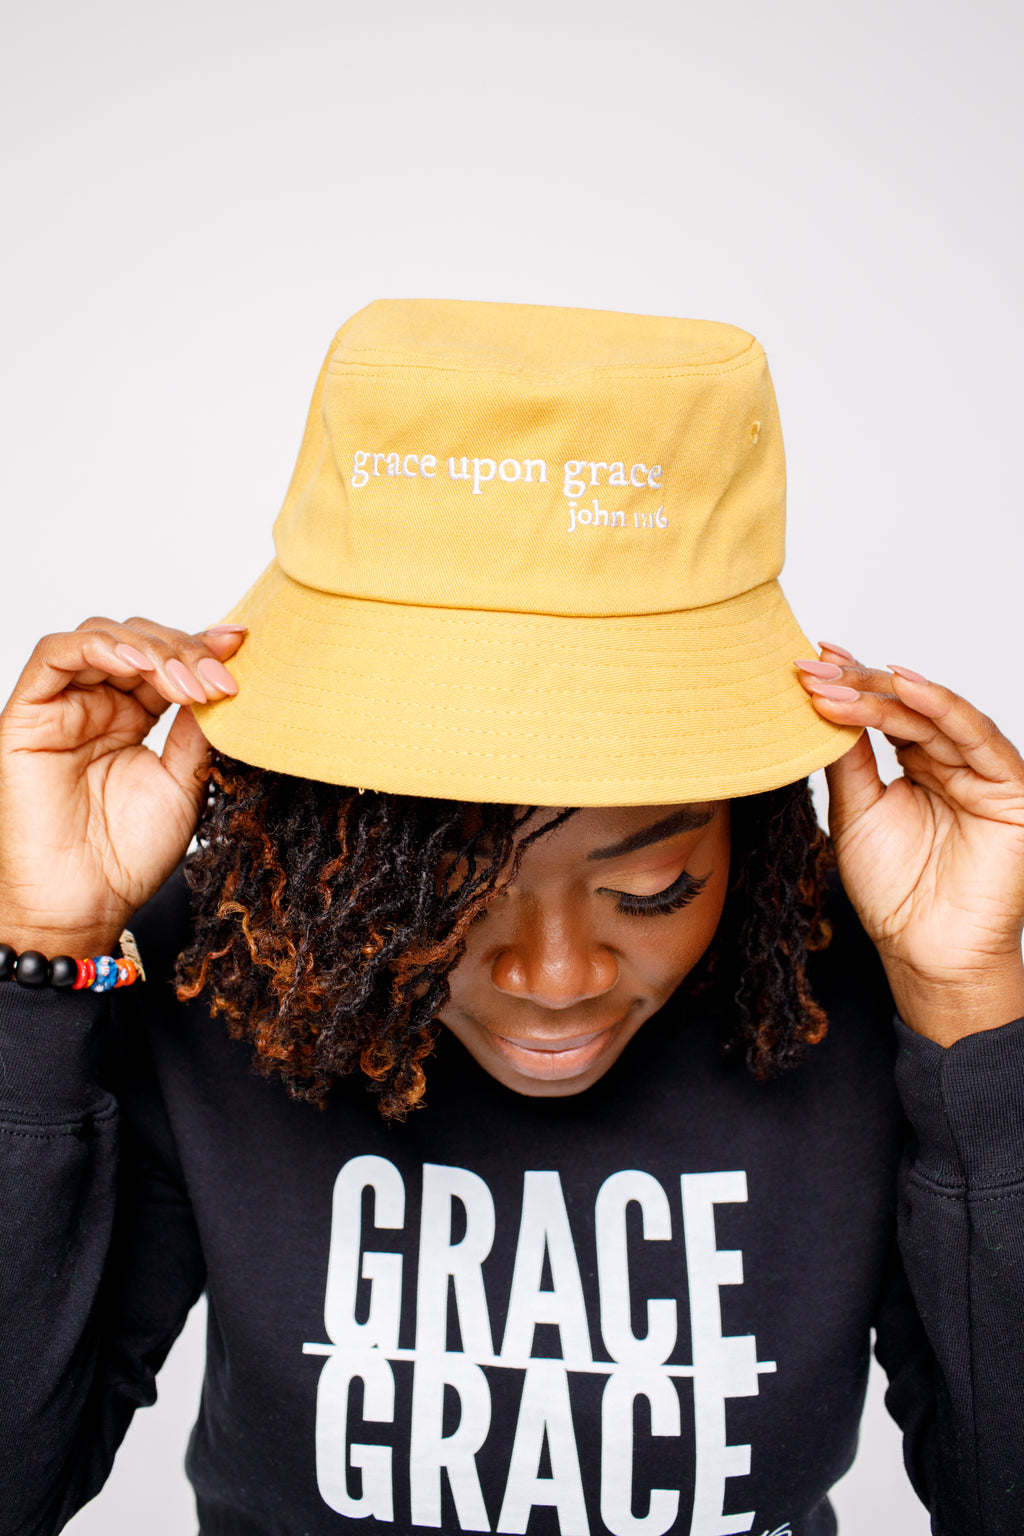 Satin Lined Bucket Hats – The Grace Upon Grace Co.